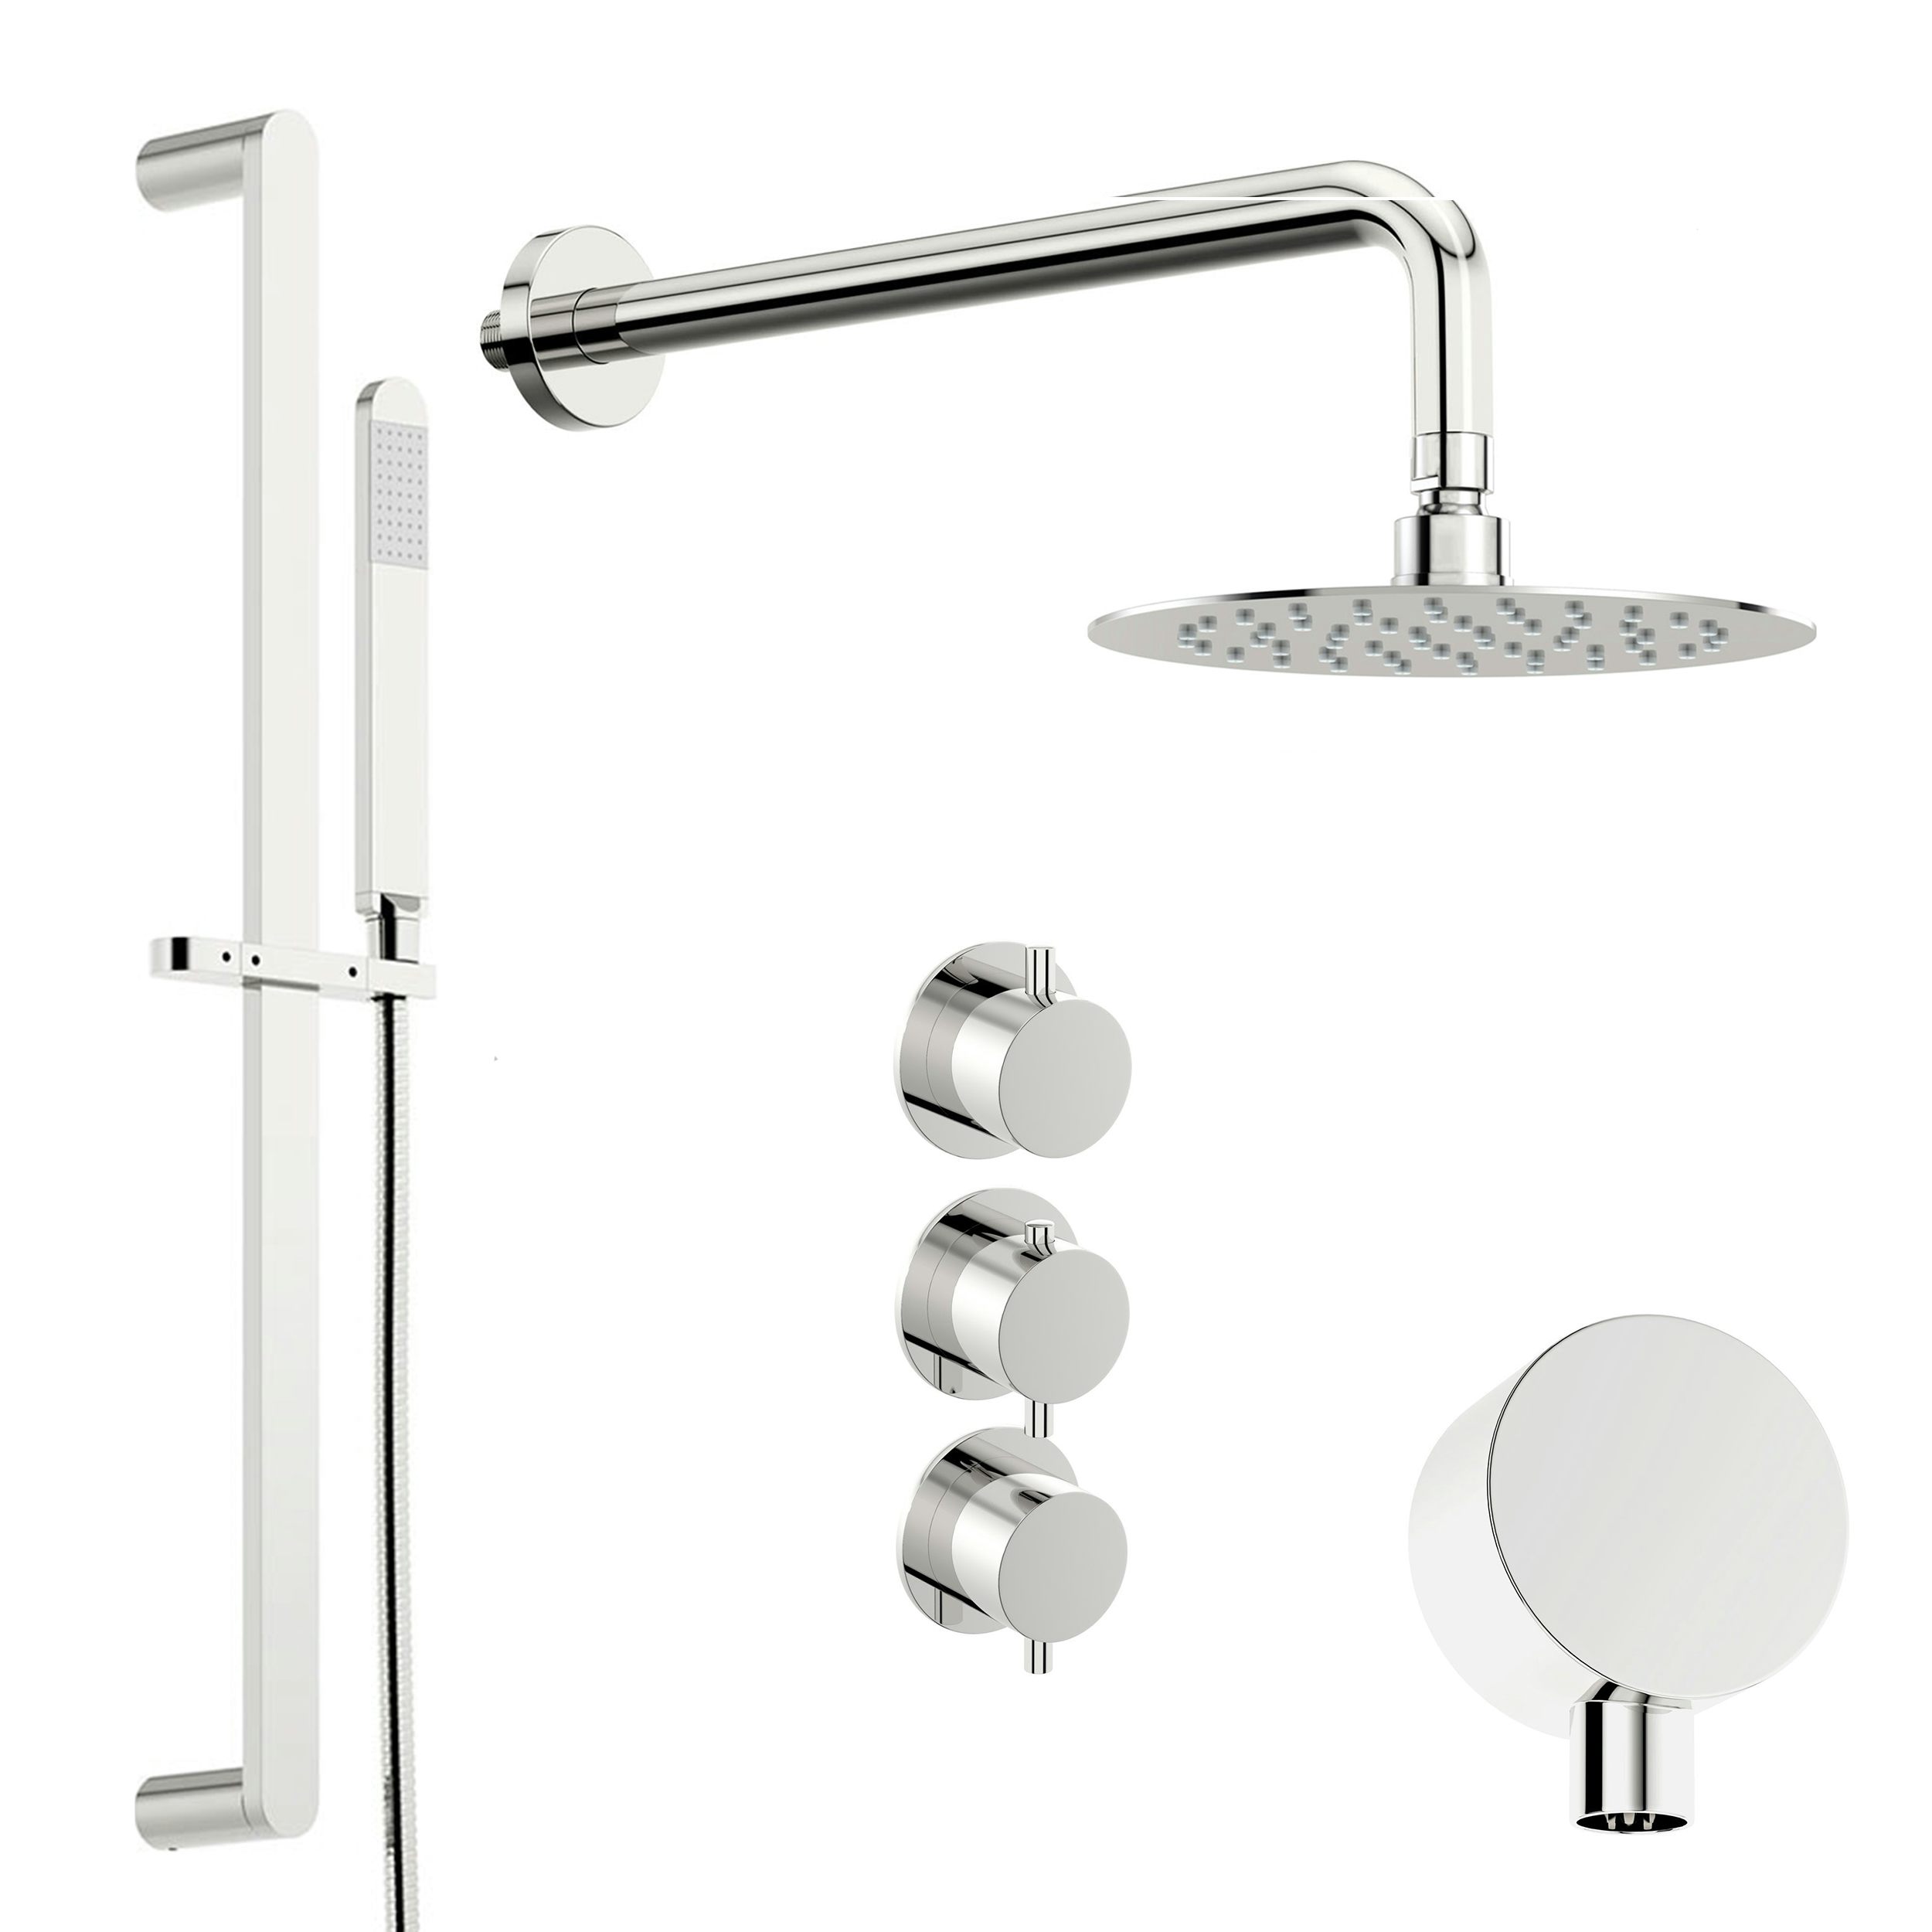 Mode Hardy thermostatic shower valve with slider rail and wall shower set 400mm